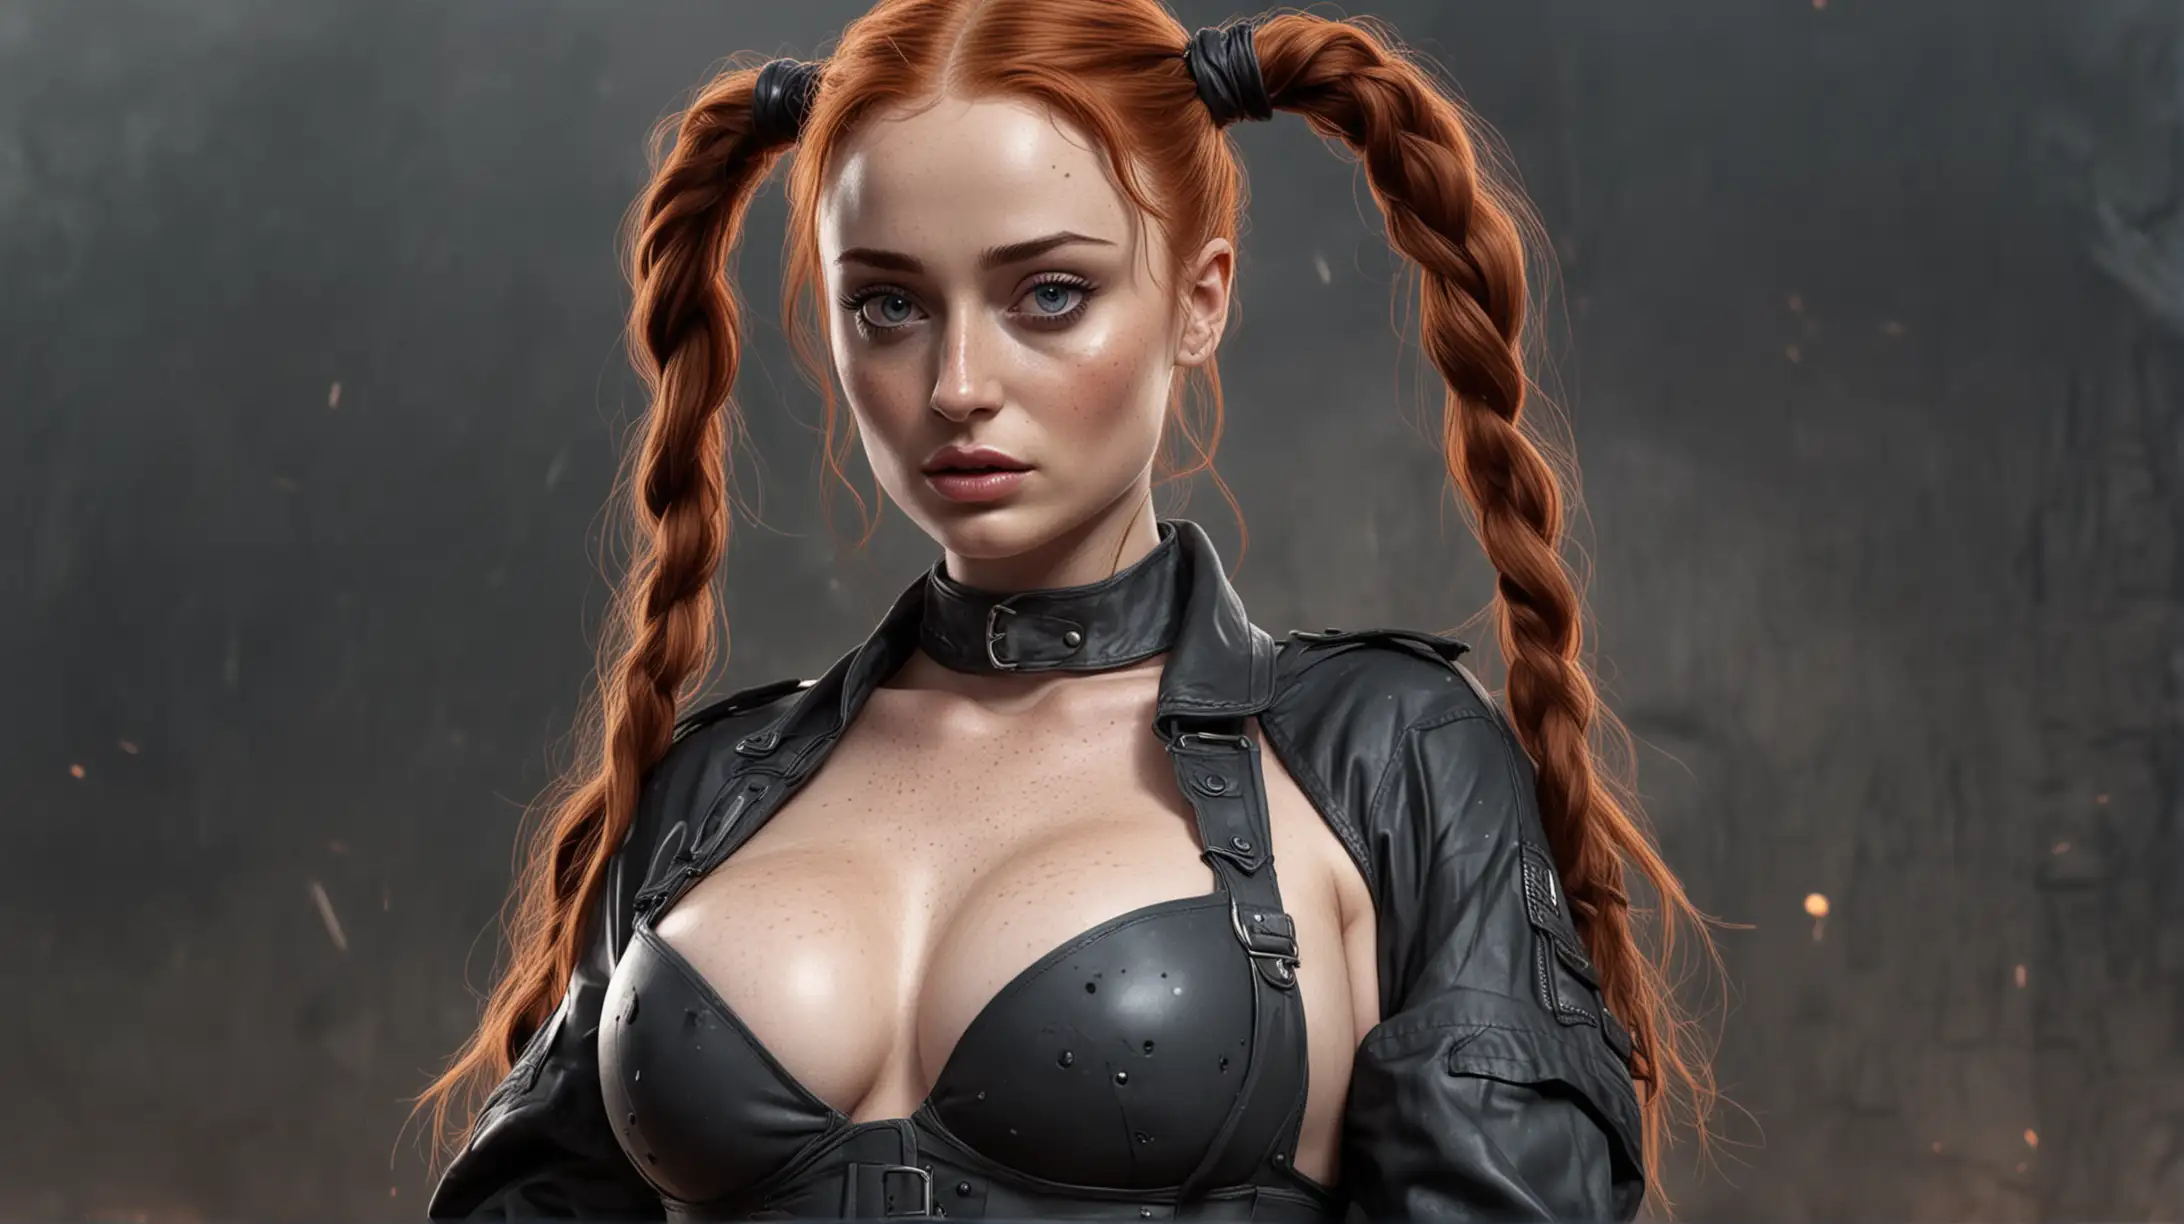 cartoon, Sophie Turner, perky figure, freckles, very big boobs, pigtails, sexy, seductive pose, apocalyptic background